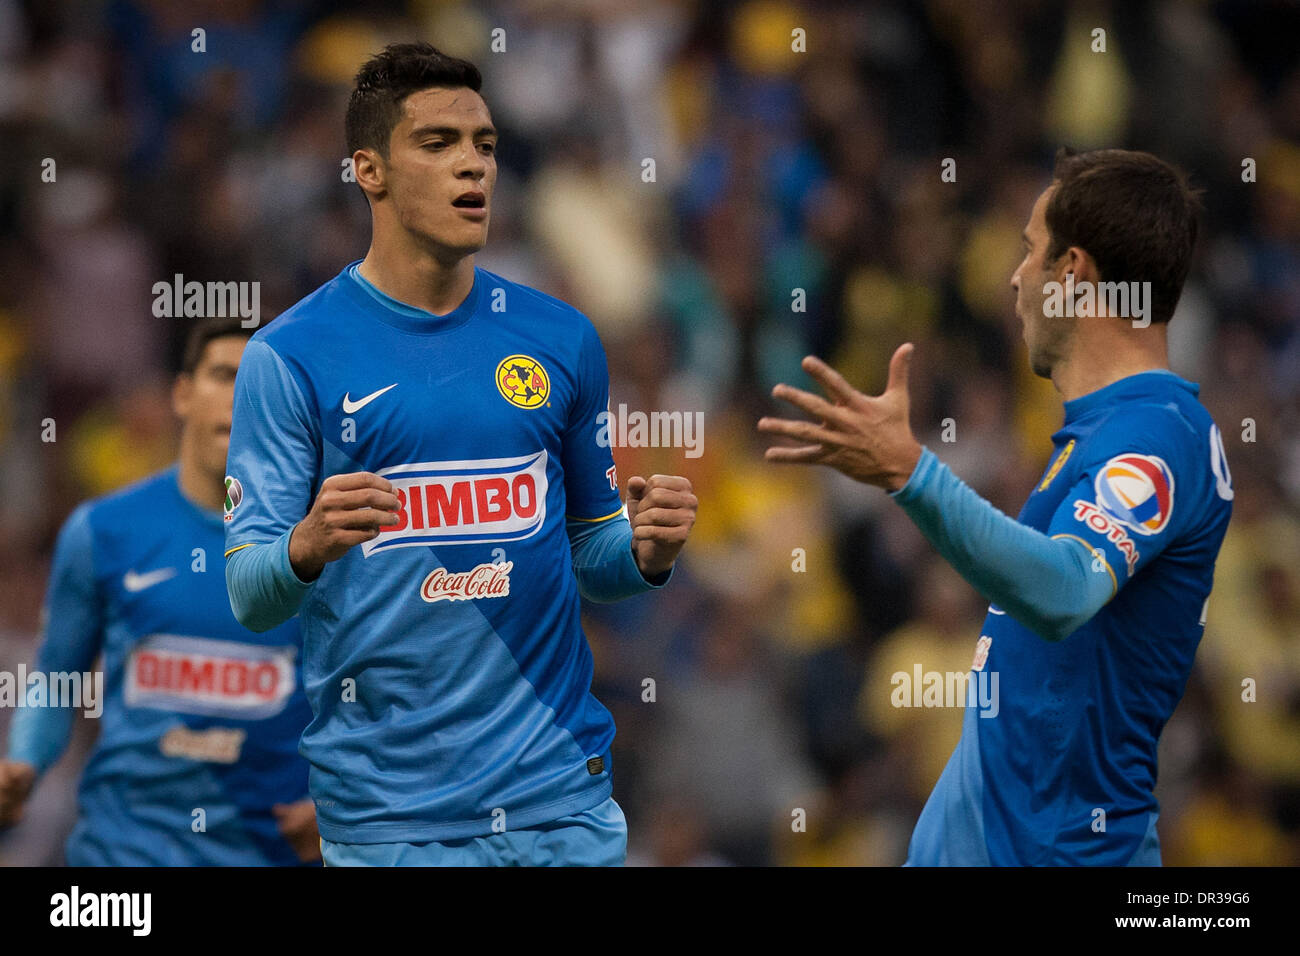 Mexico City, Mexico. 19th Jan, 2014. America's Raul Jimenez (C) celebrates after scoring during the match of the MX League Closing Tournament 2014, against Leon, in Mexico City, capital of Mexico, on Jan. 18, 2014. Credit:  Pedro Mera/Xinhua/Alamy Live News Stock Photo